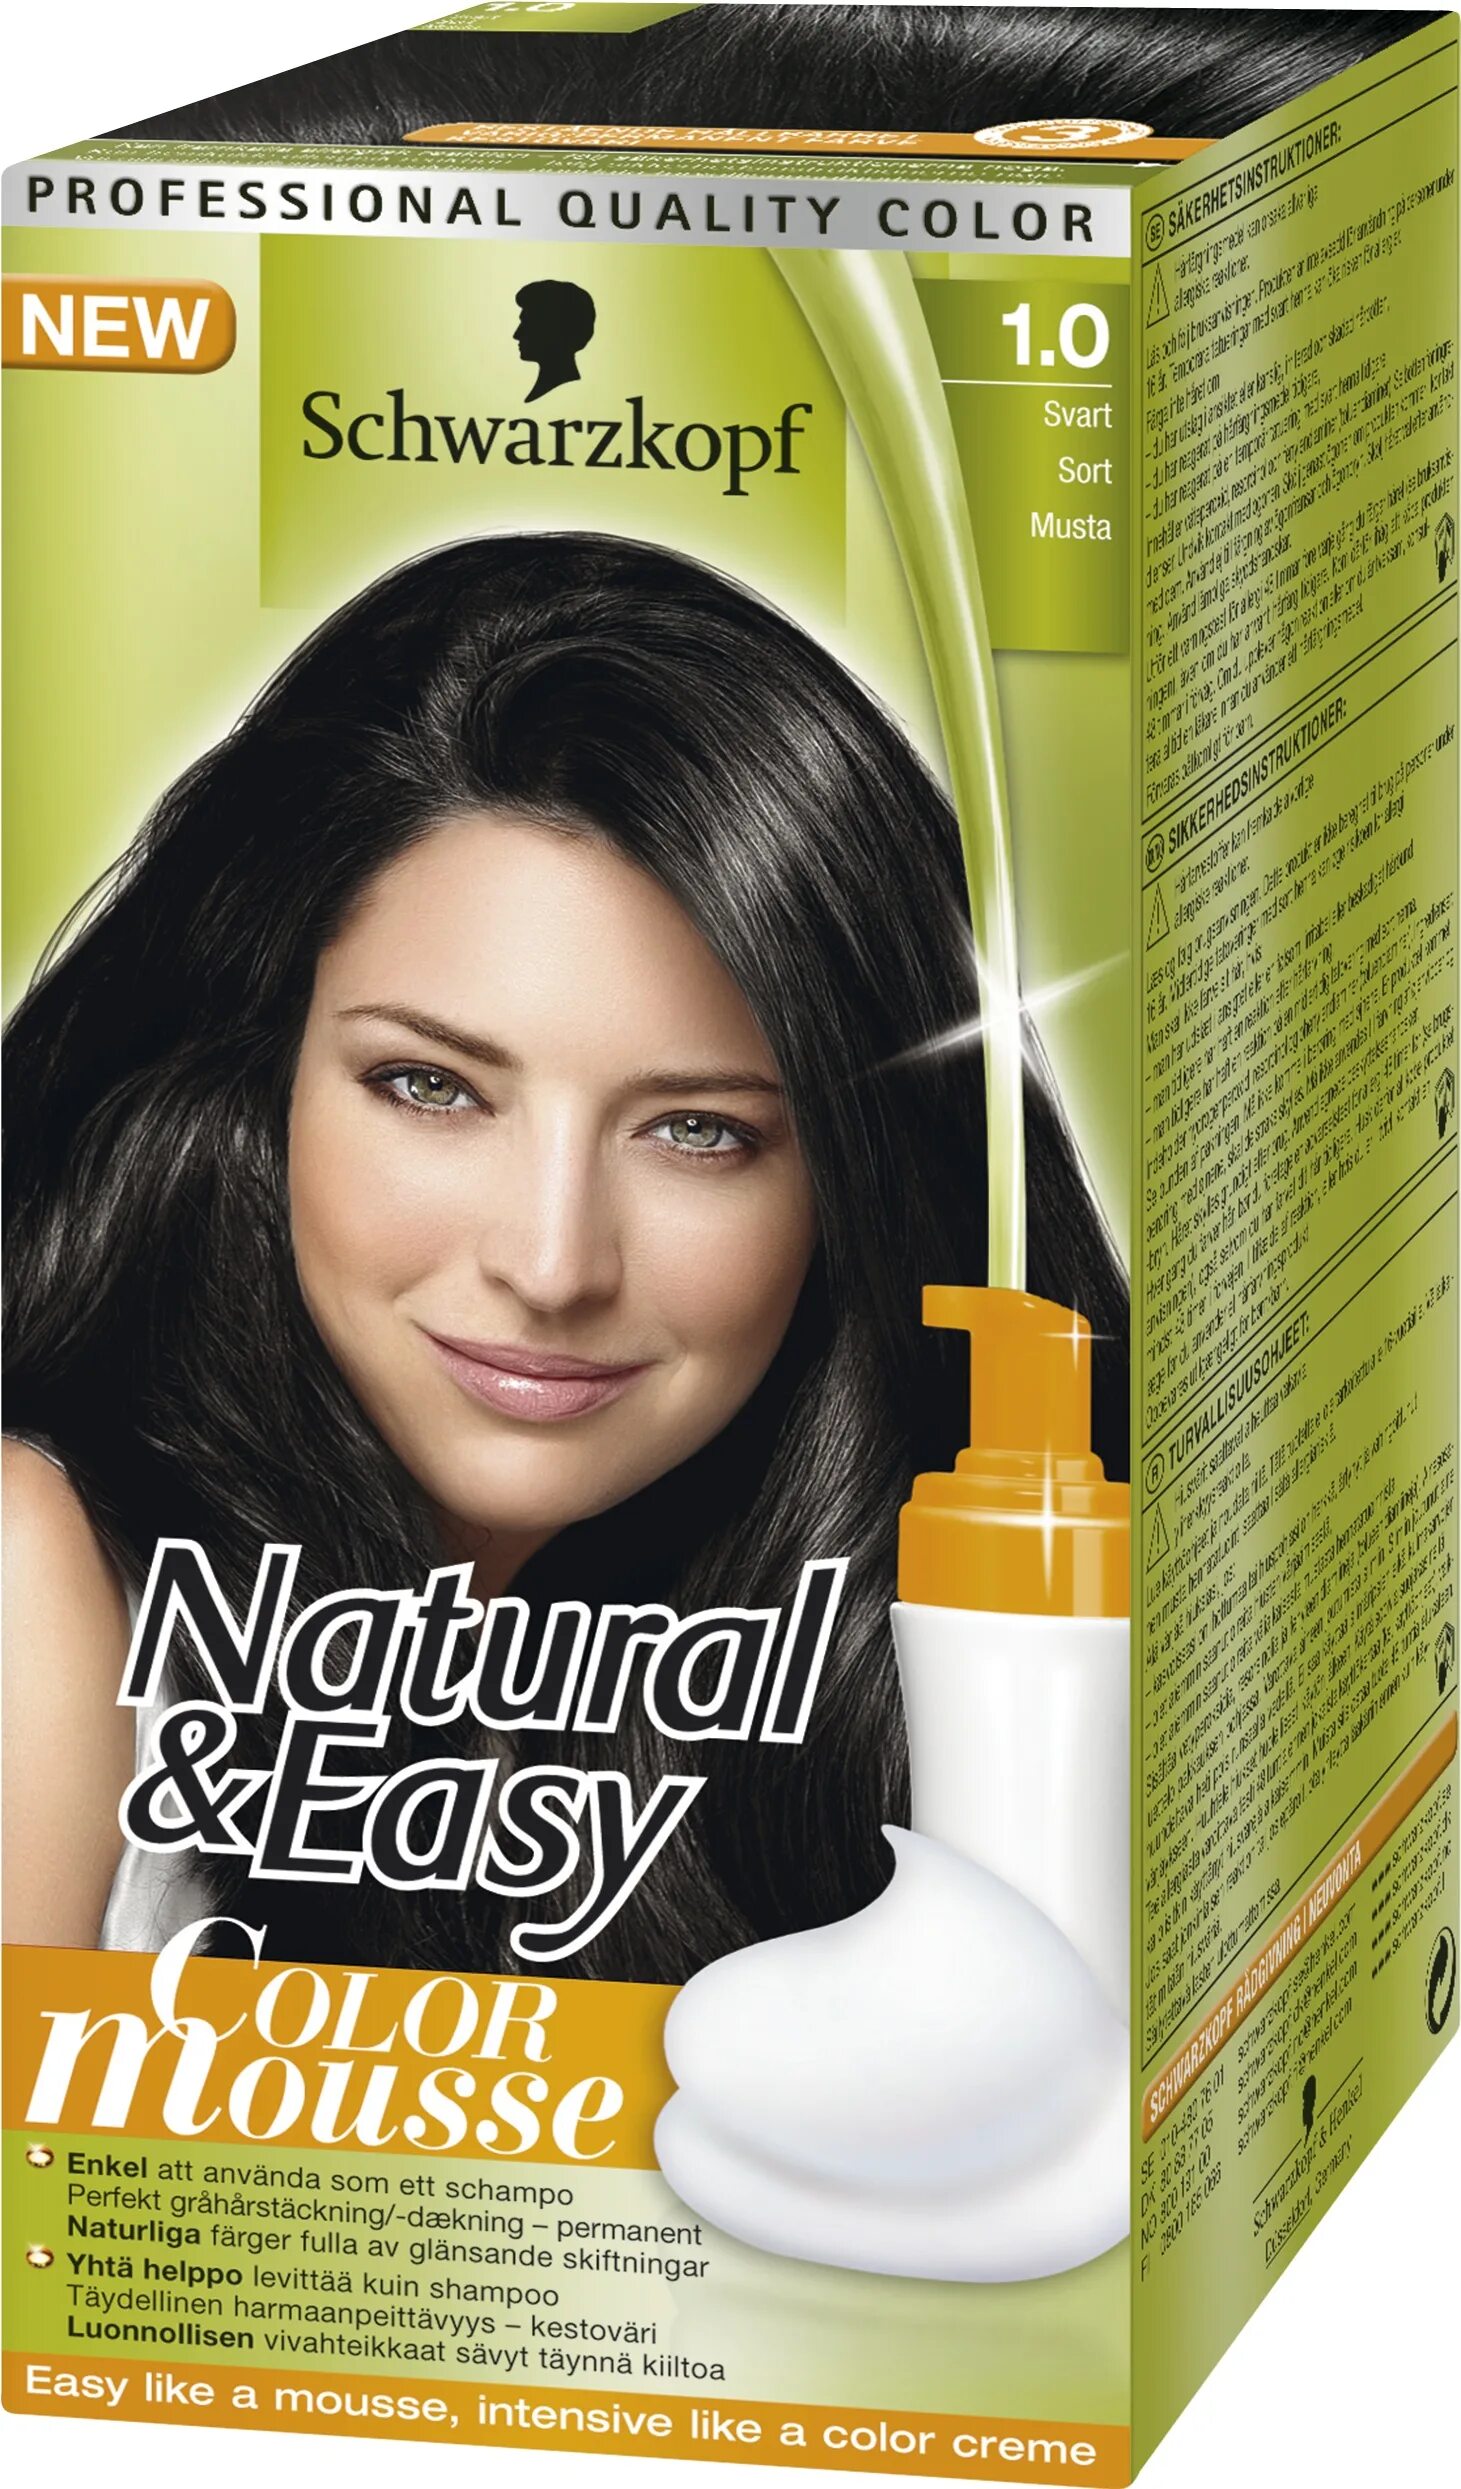 Natural easy. Шварцкопф natural easy палитра. Краска Schwarzkopf natural easy 532. Краска для волос шварцкопф natural easy. Краска для волос Schwarzkopf natural easy палитра.